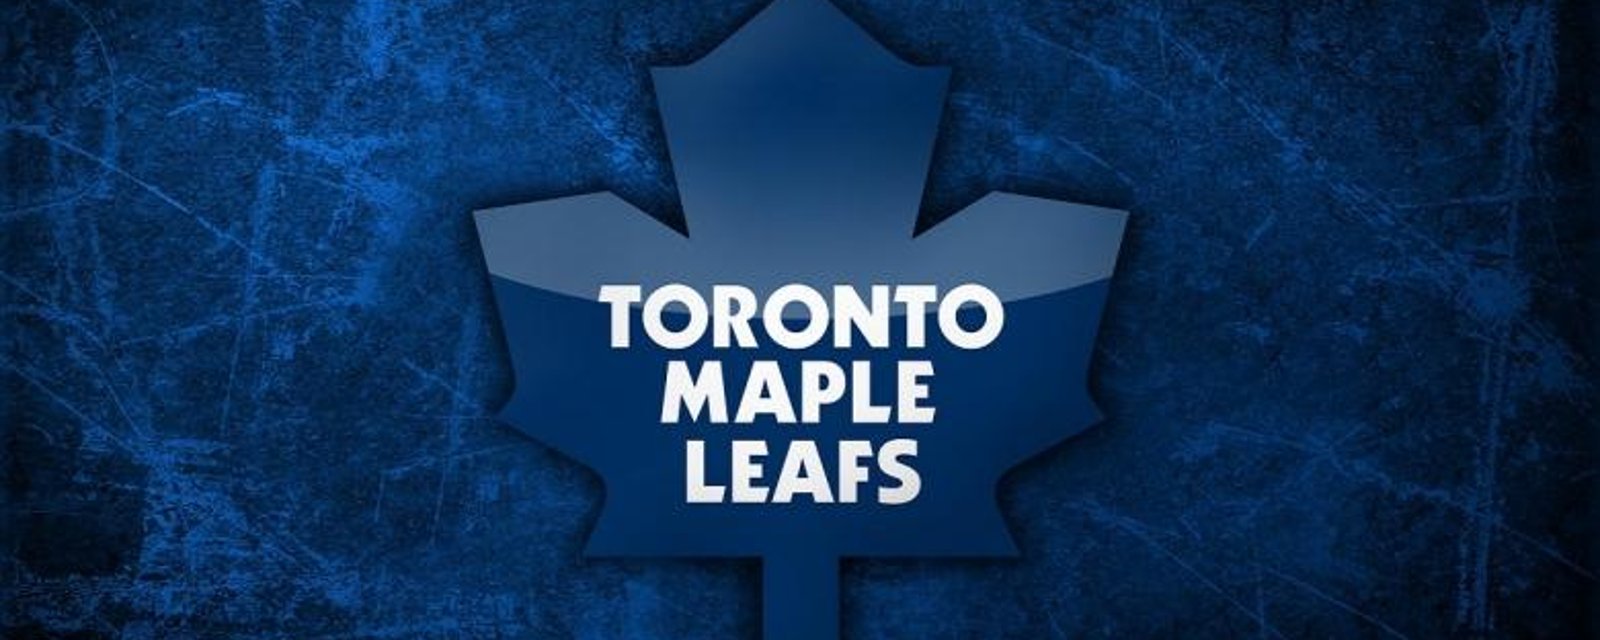 Breaking: New logos for the Toronto Maple Leafs and Marlies.